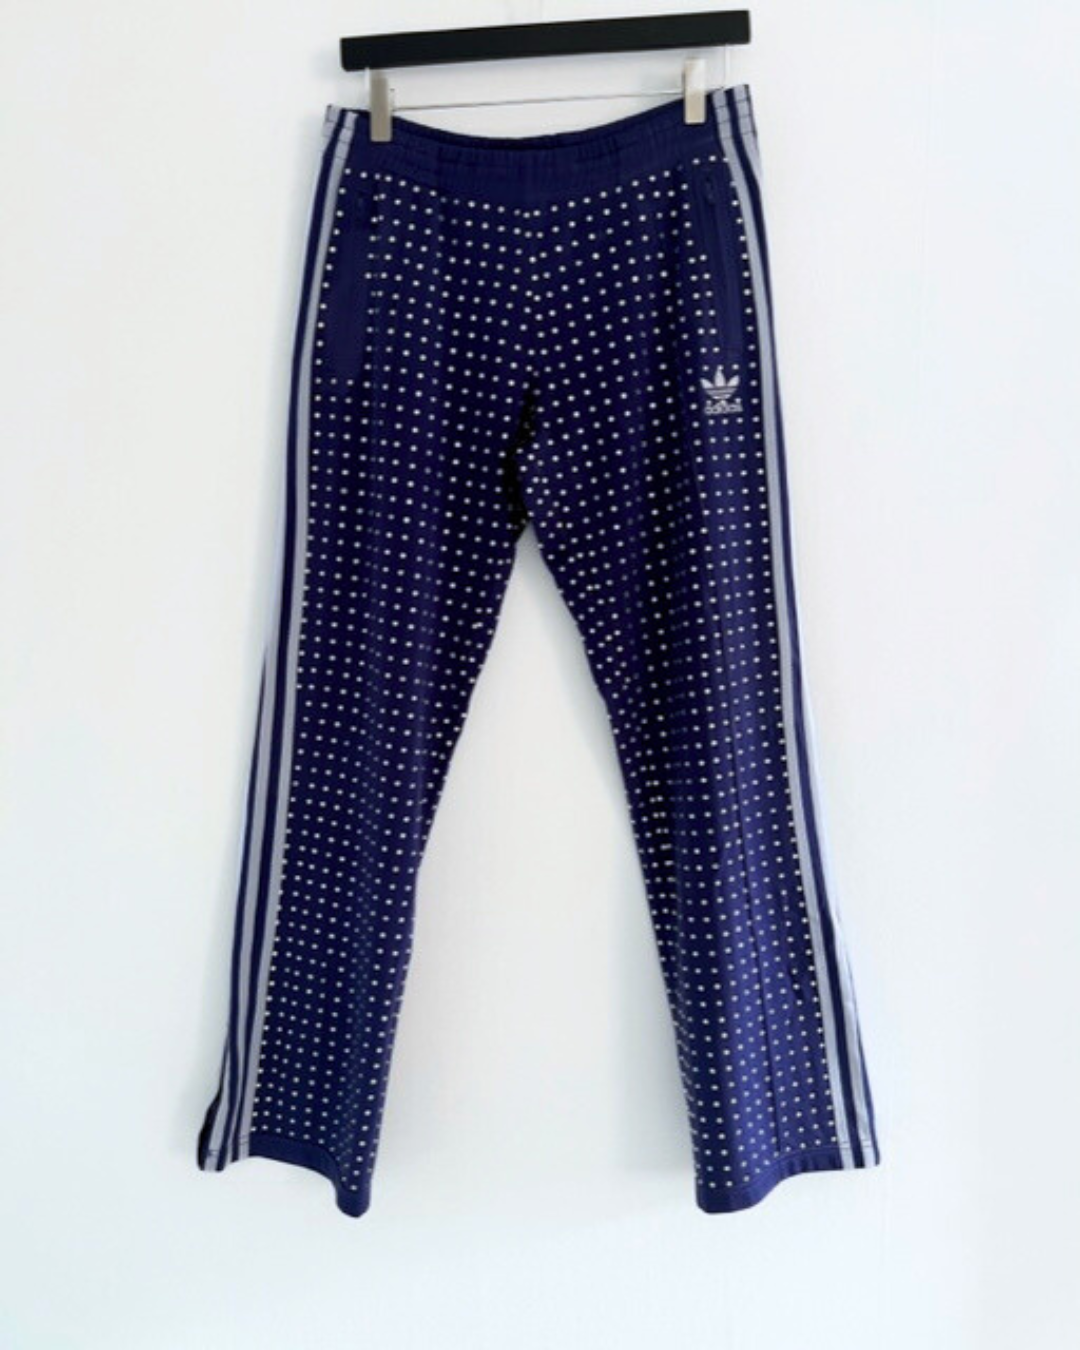 Vintage Purple / White Stripe ADIDAS Tracksuit pants with all over diamante studs